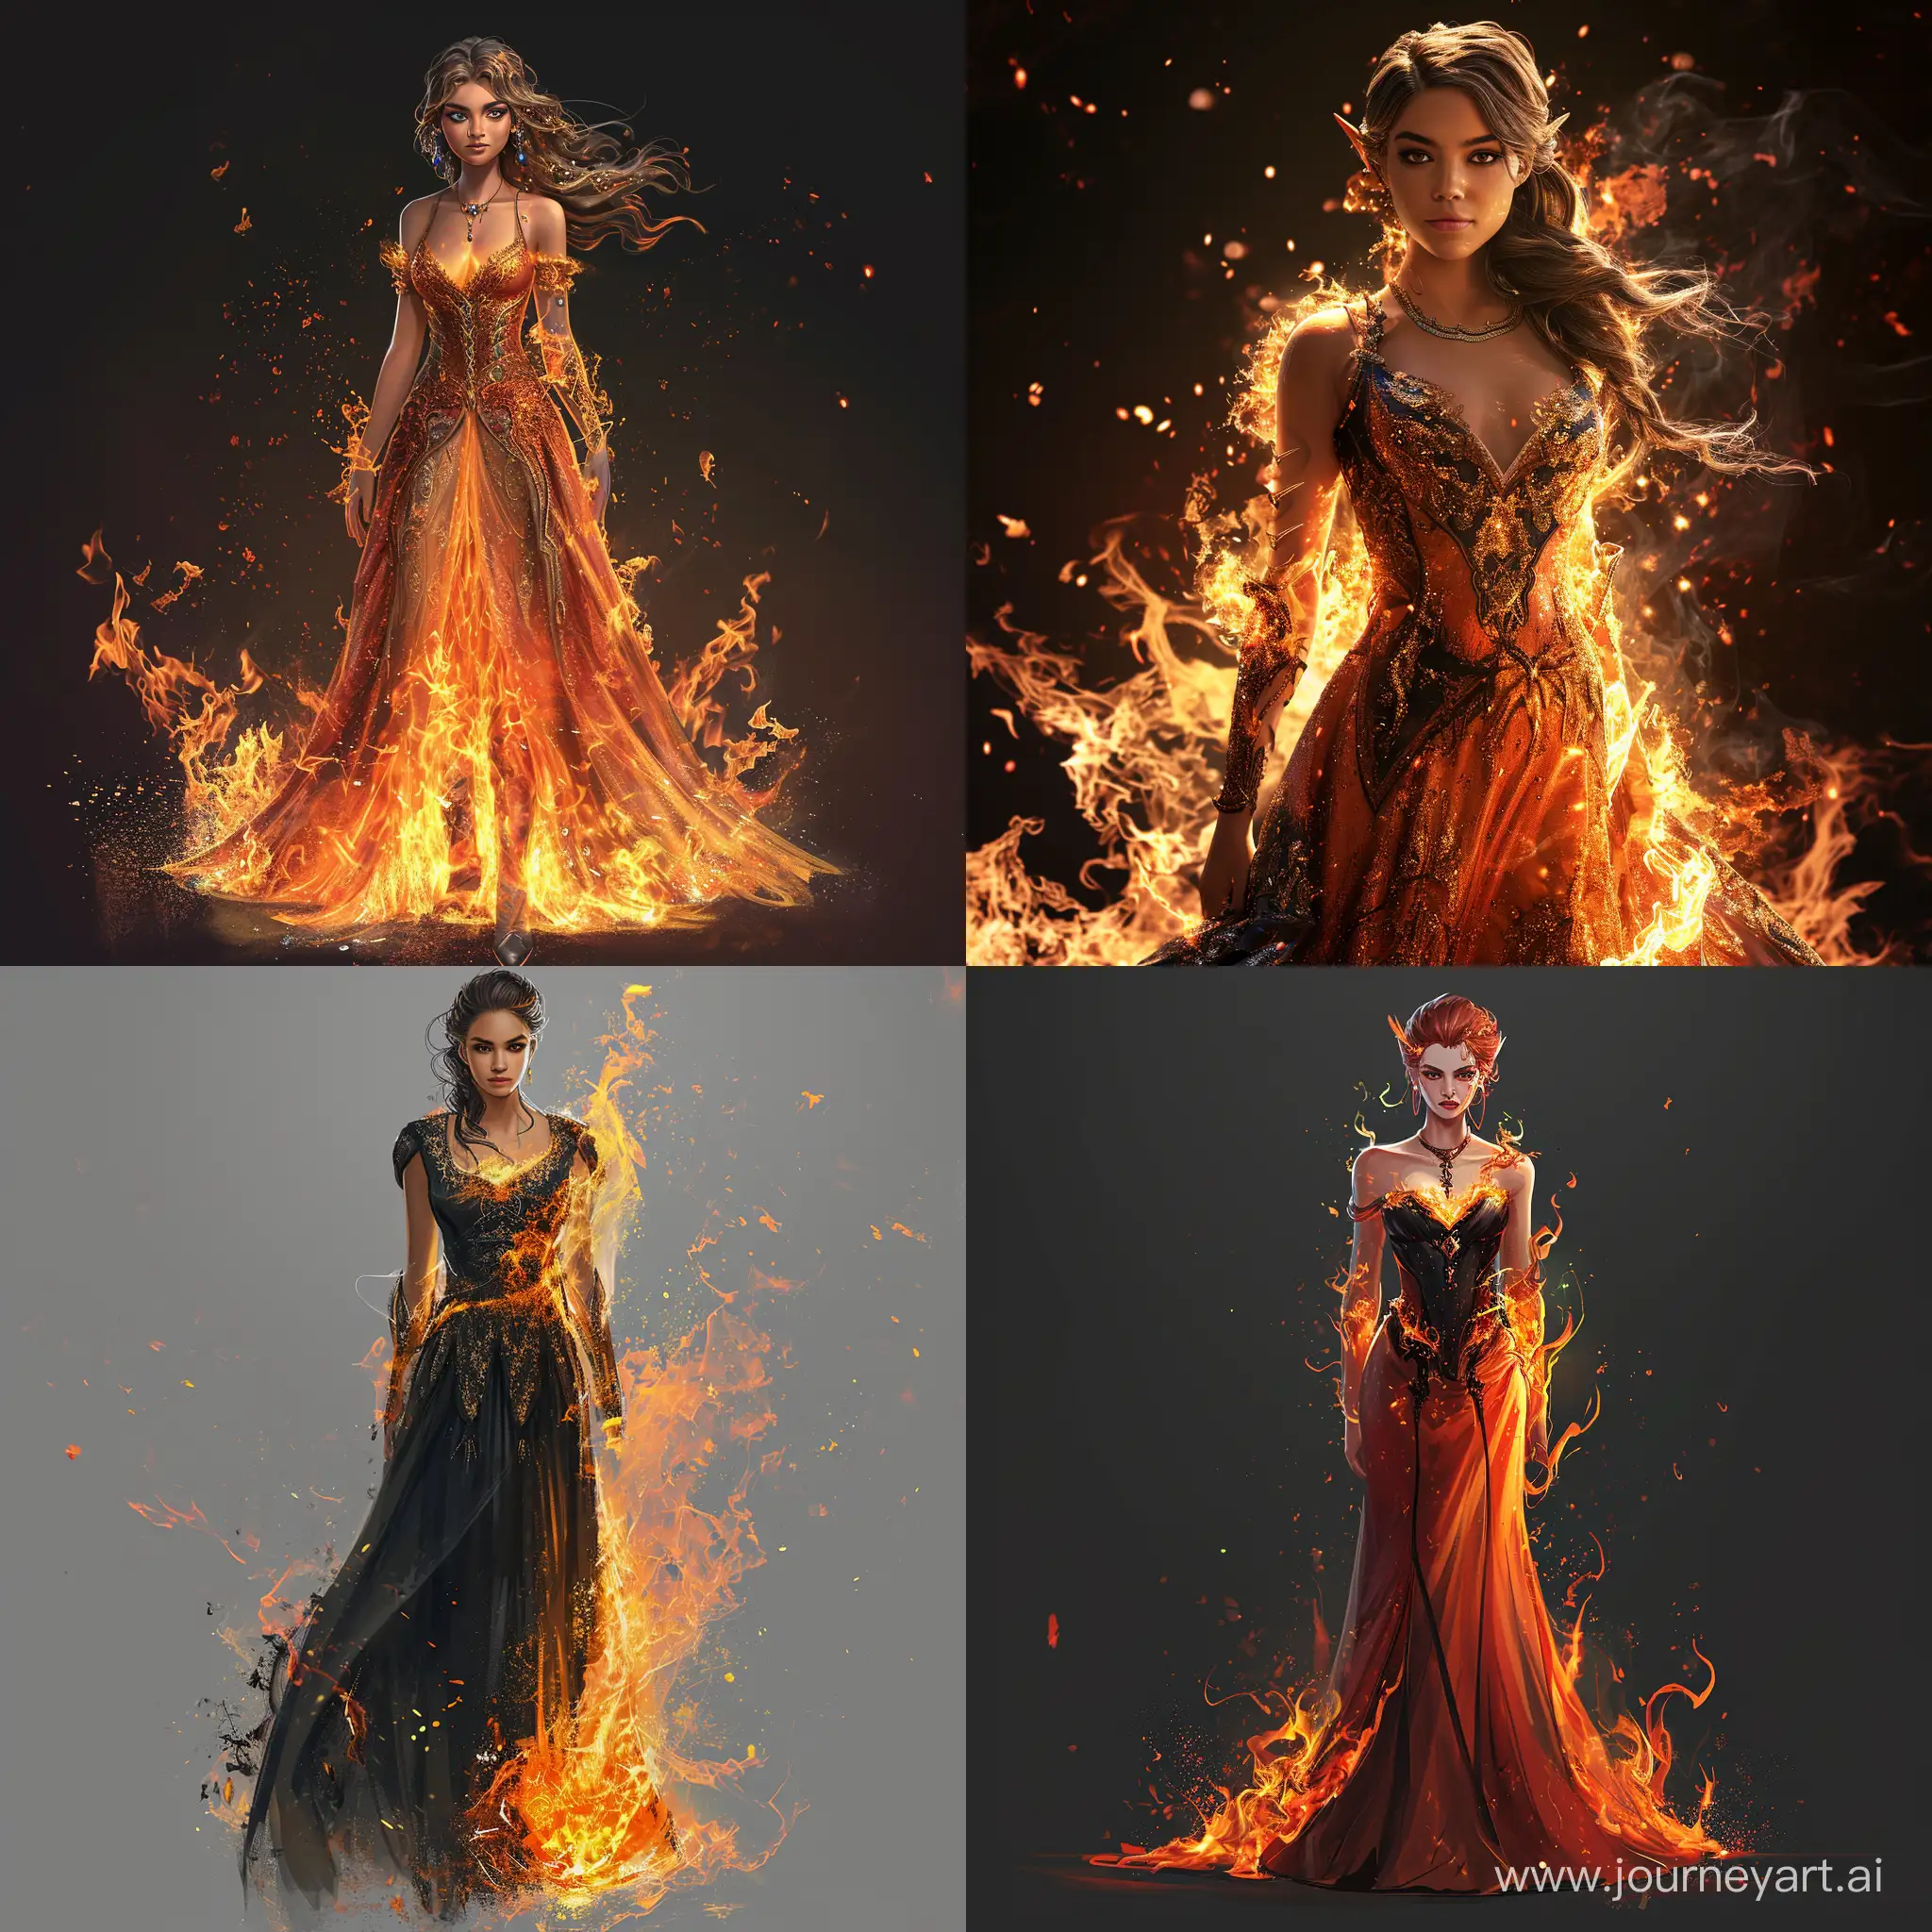 create a high fantasy character in a very realistic style.  she is a young, beautiful fire sorceress wearing an elegant dress.  she is tall and imposing and has a determined and intimidating expression